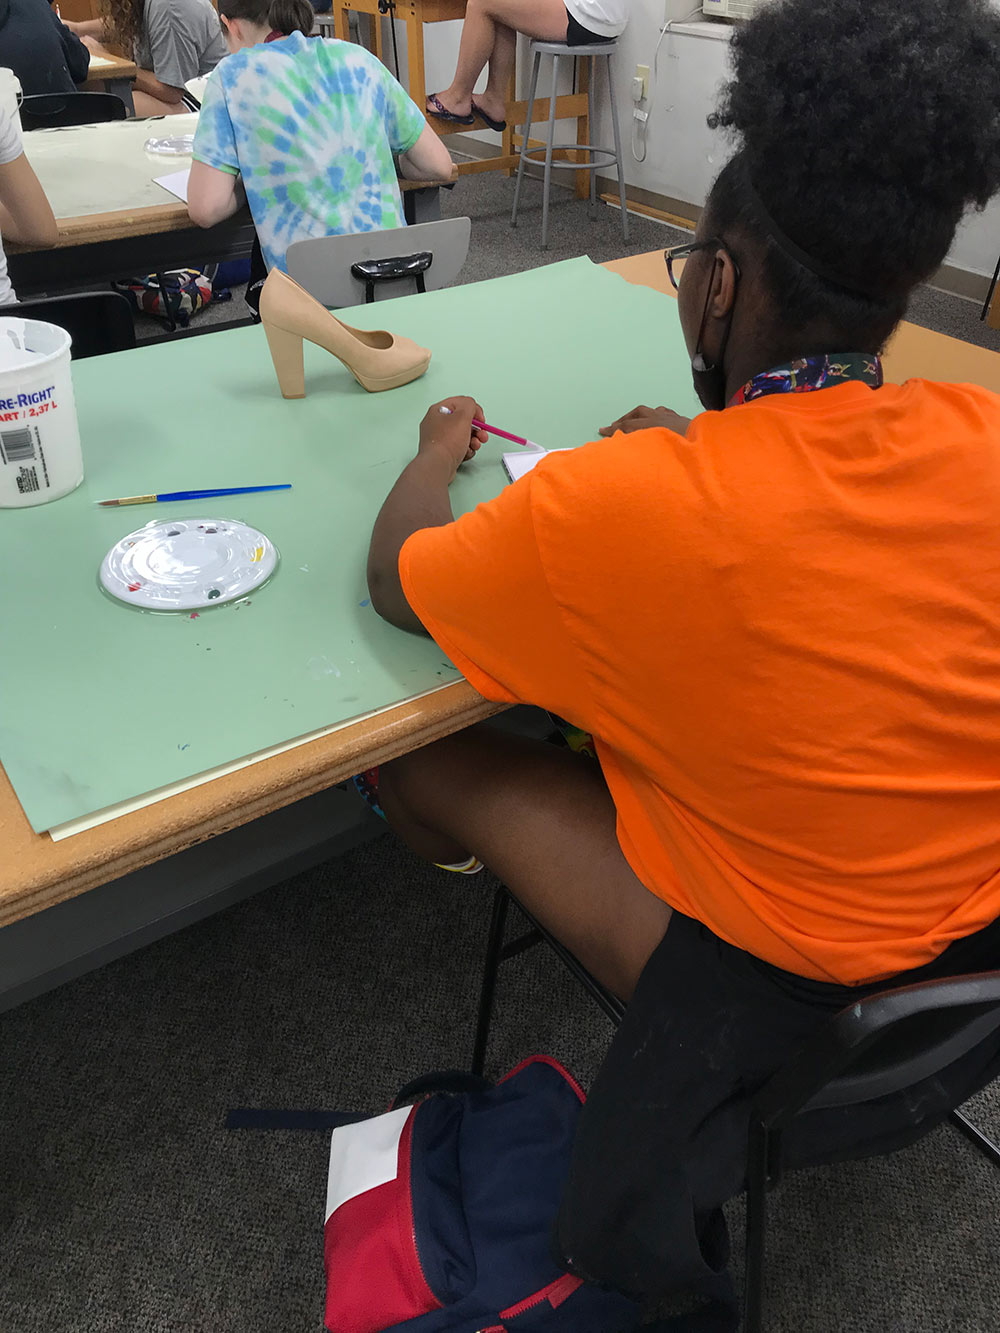 campers working on painting